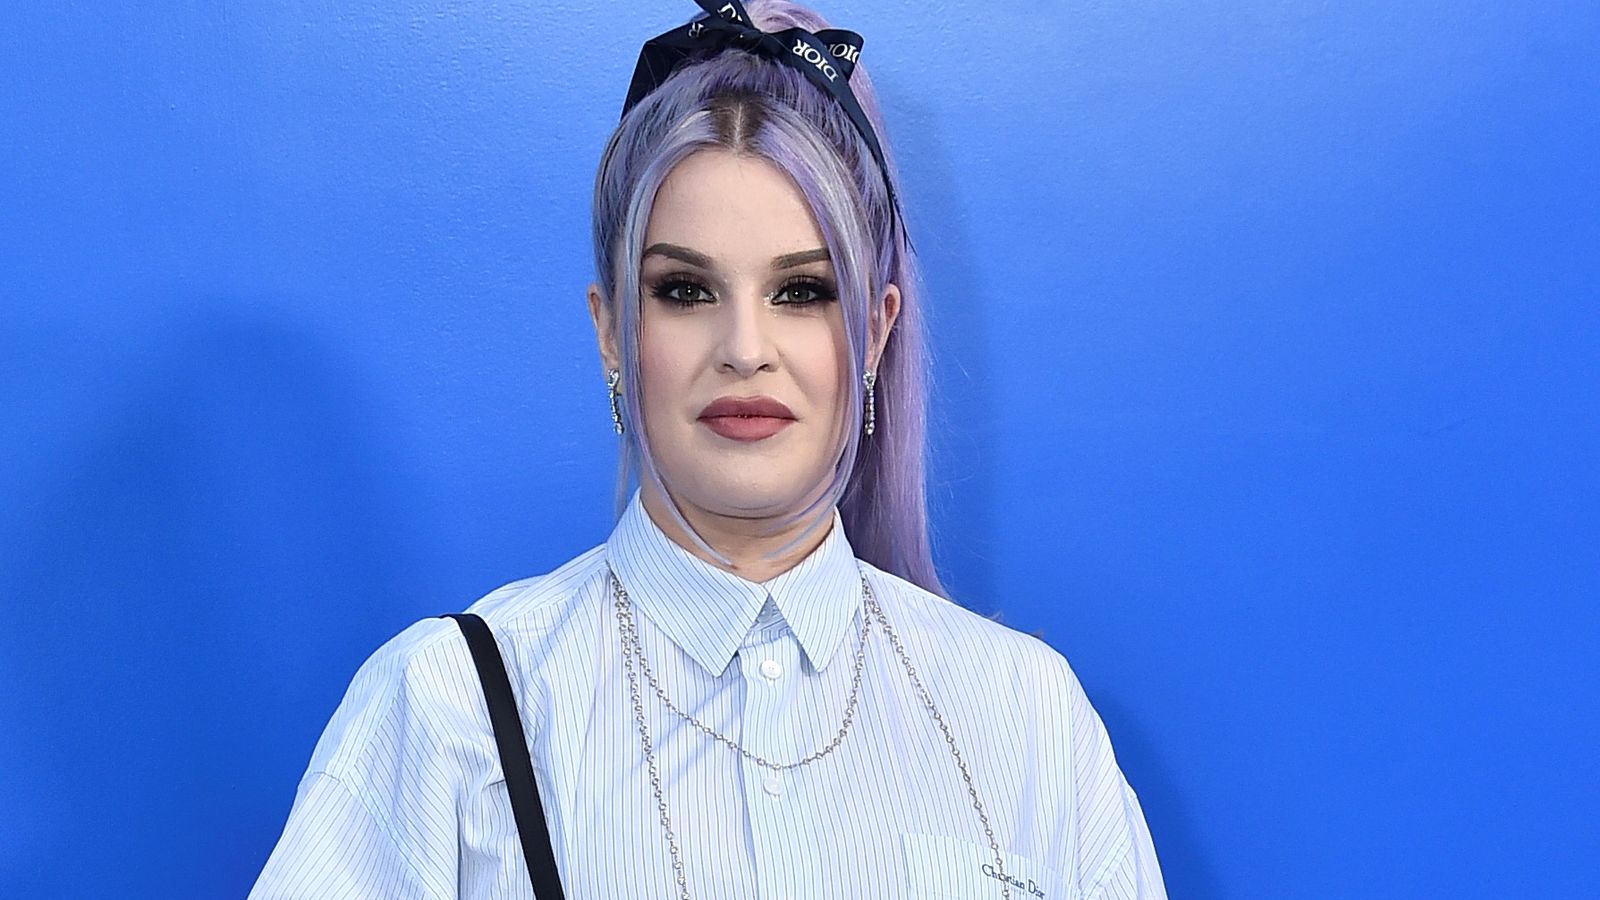 Kelly Osbourne says 'it's no one's place but mine' after mum Sharon reveals newborn son's name